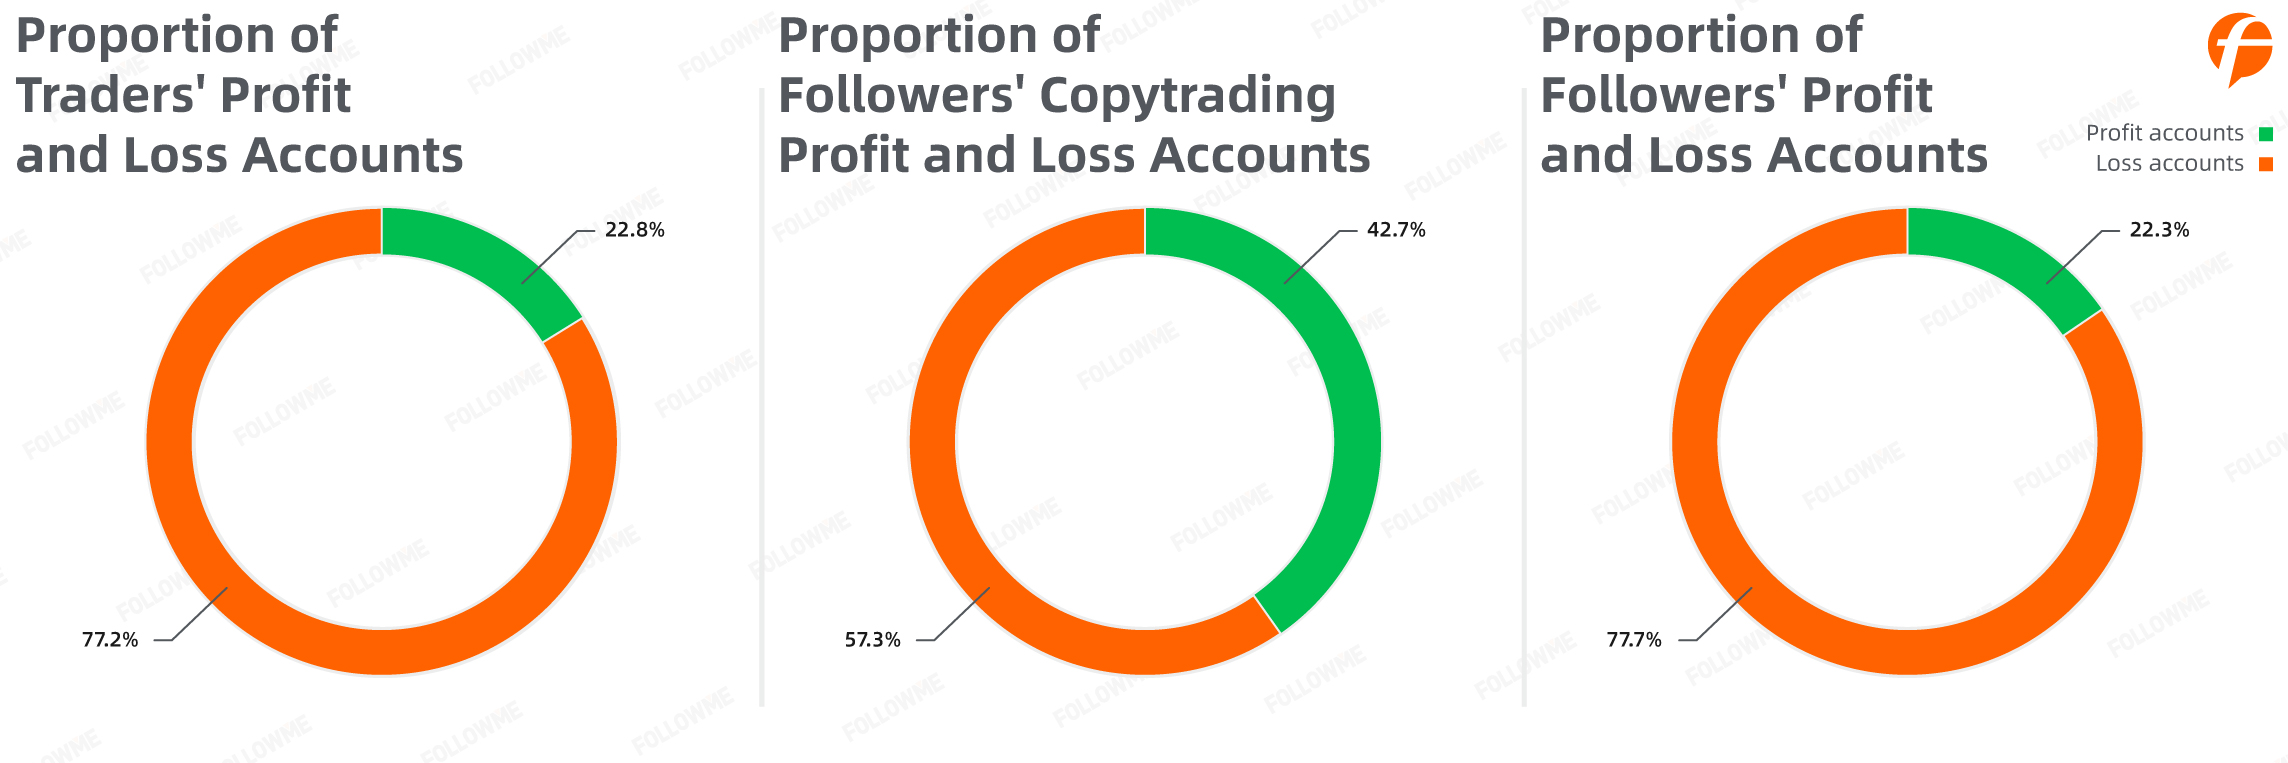 FOLLOWME Trading Community Industry Report for the first half of 2020